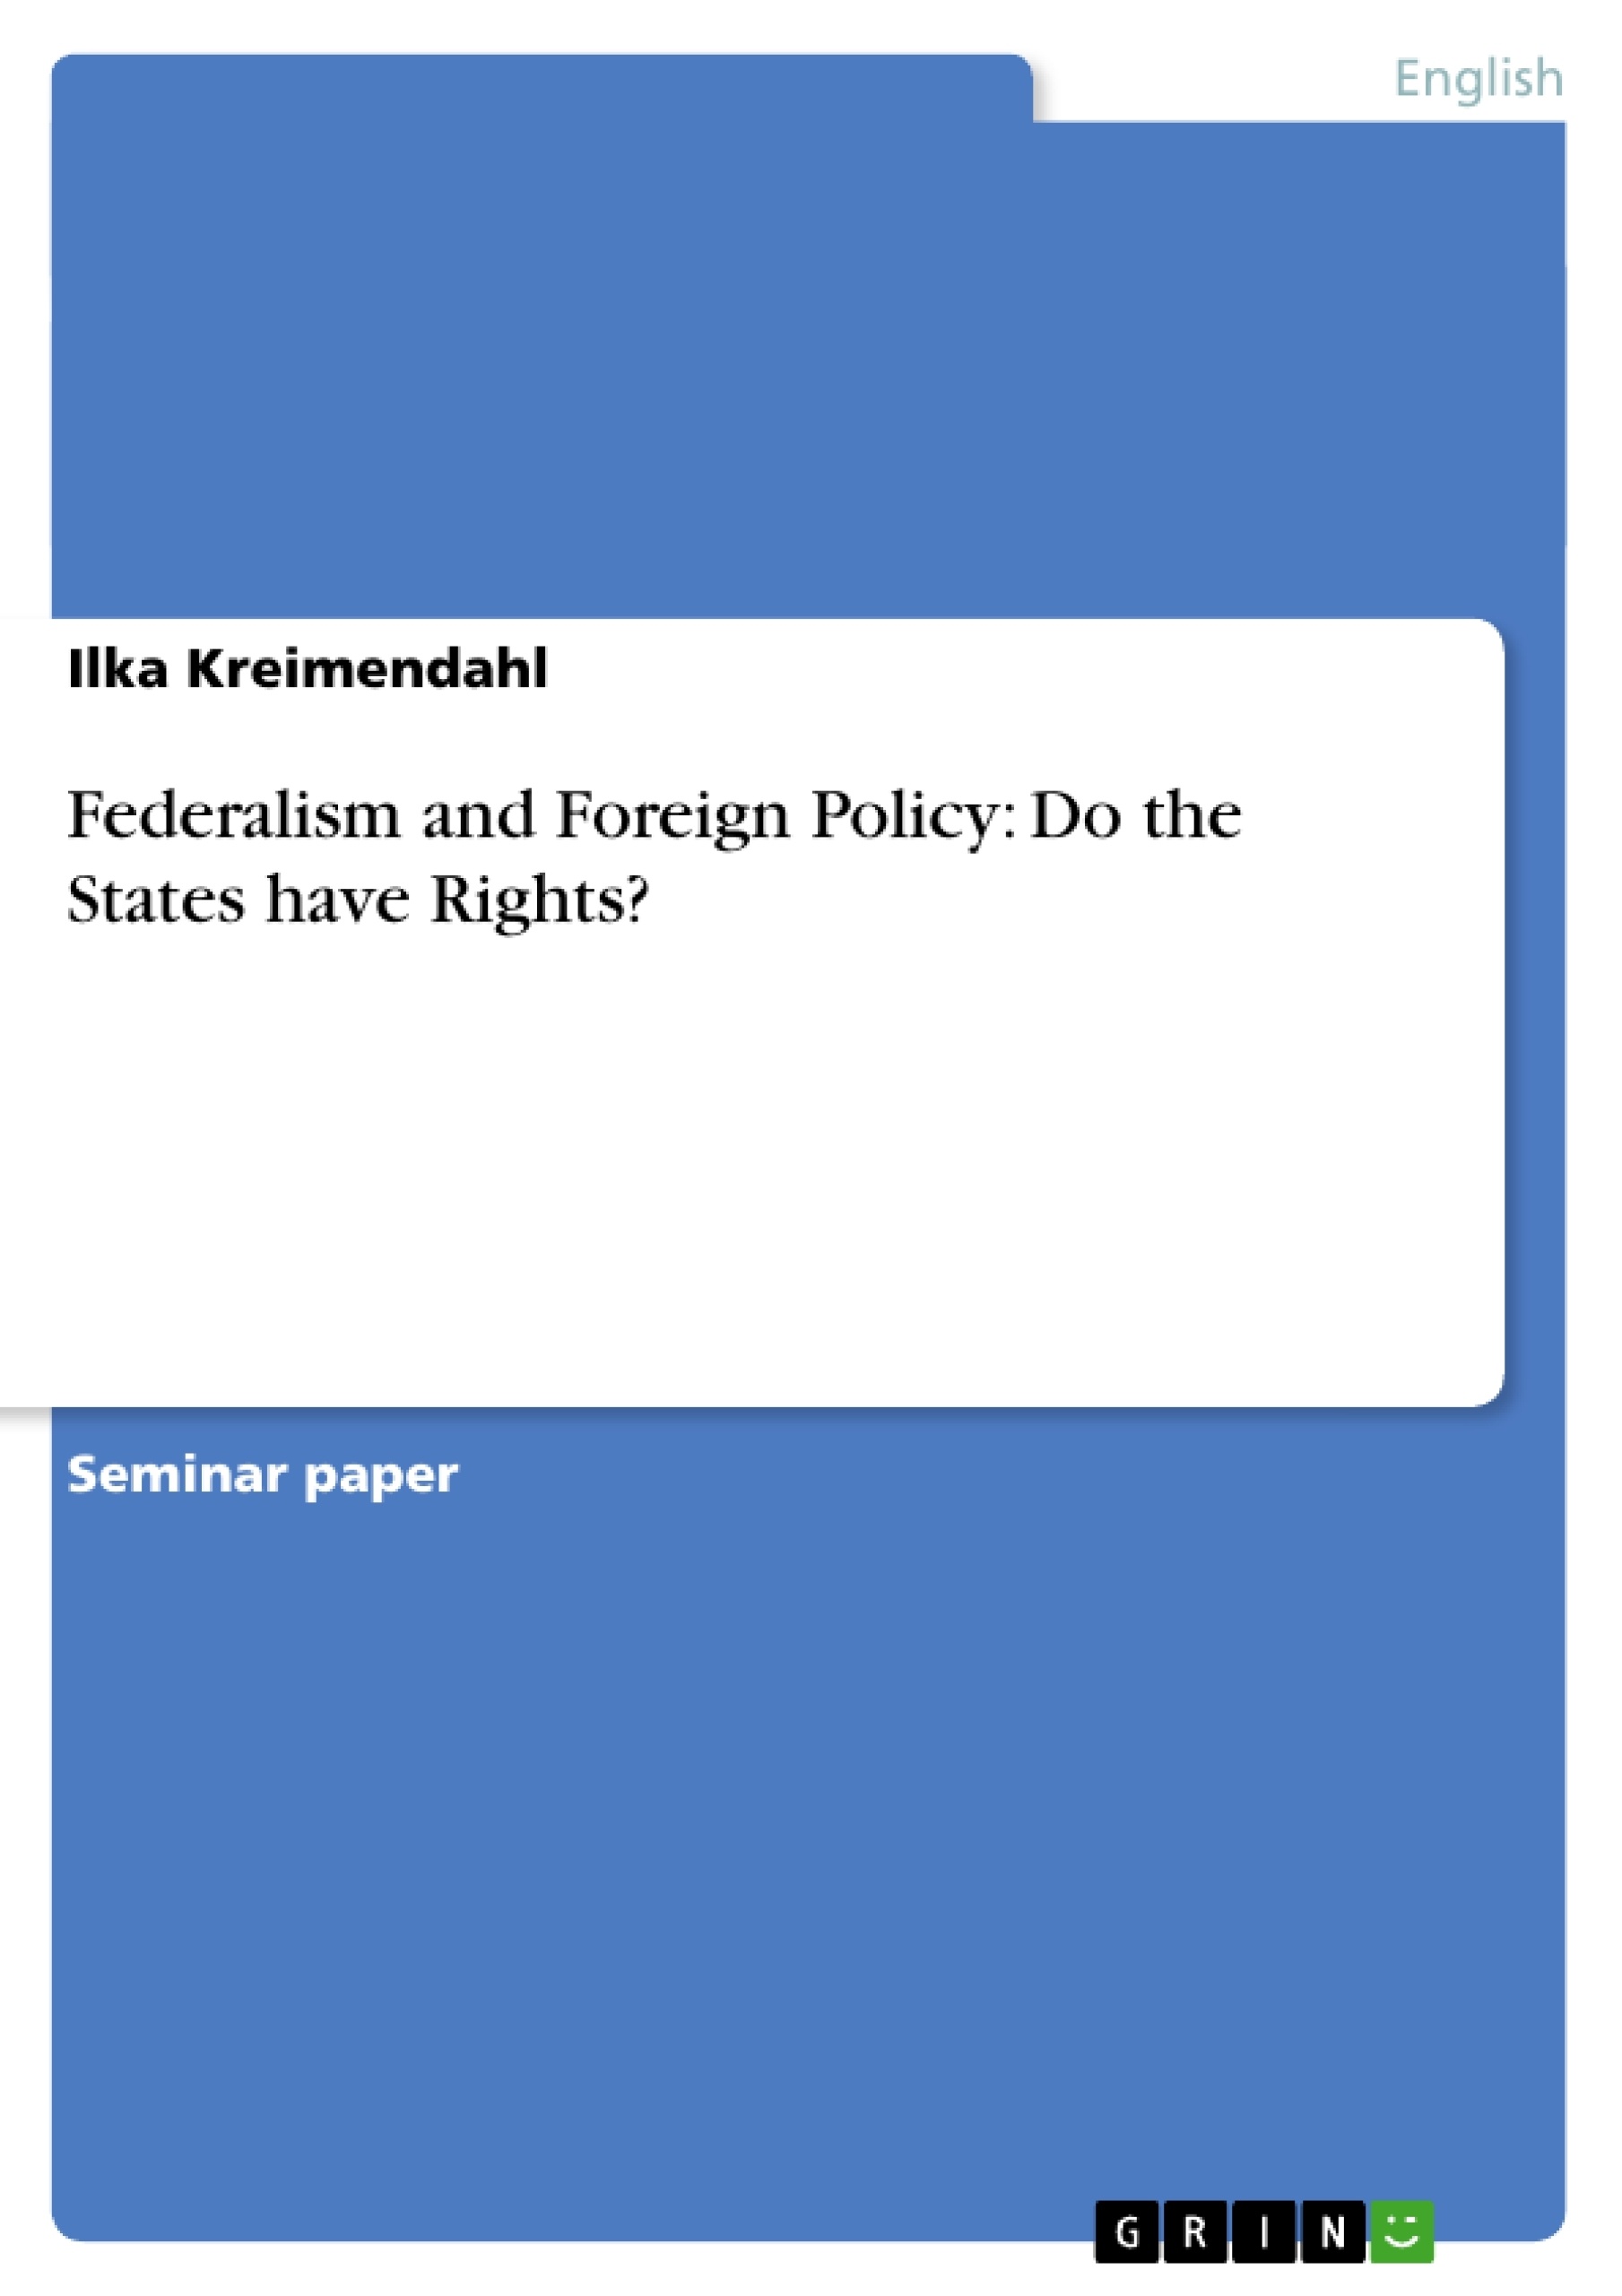 Title: Federalism and Foreign Policy: Do the States have Rights?